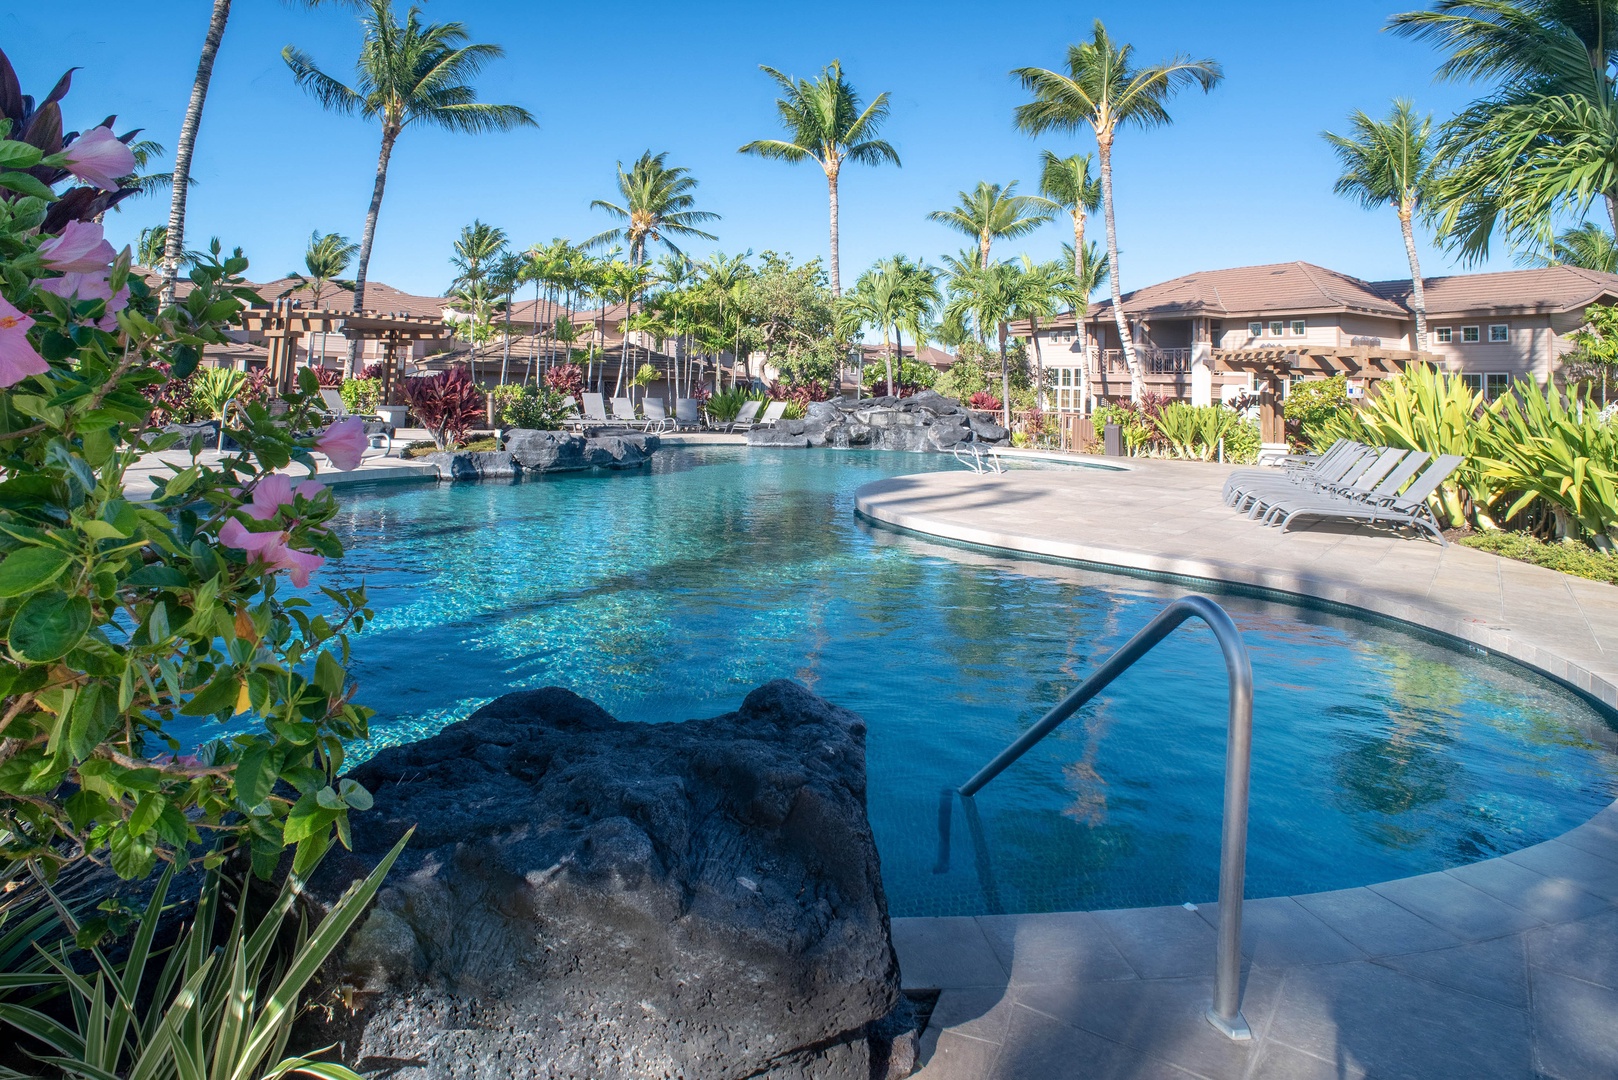 Waikoloa Vacation Rentals, Waikoloa Colony Villas 403 - The Other Free-From Swimming Pool w/ Jacuzzi, BBQ Area, Loungers, Cascading Waterfall & Two Fitness Centers